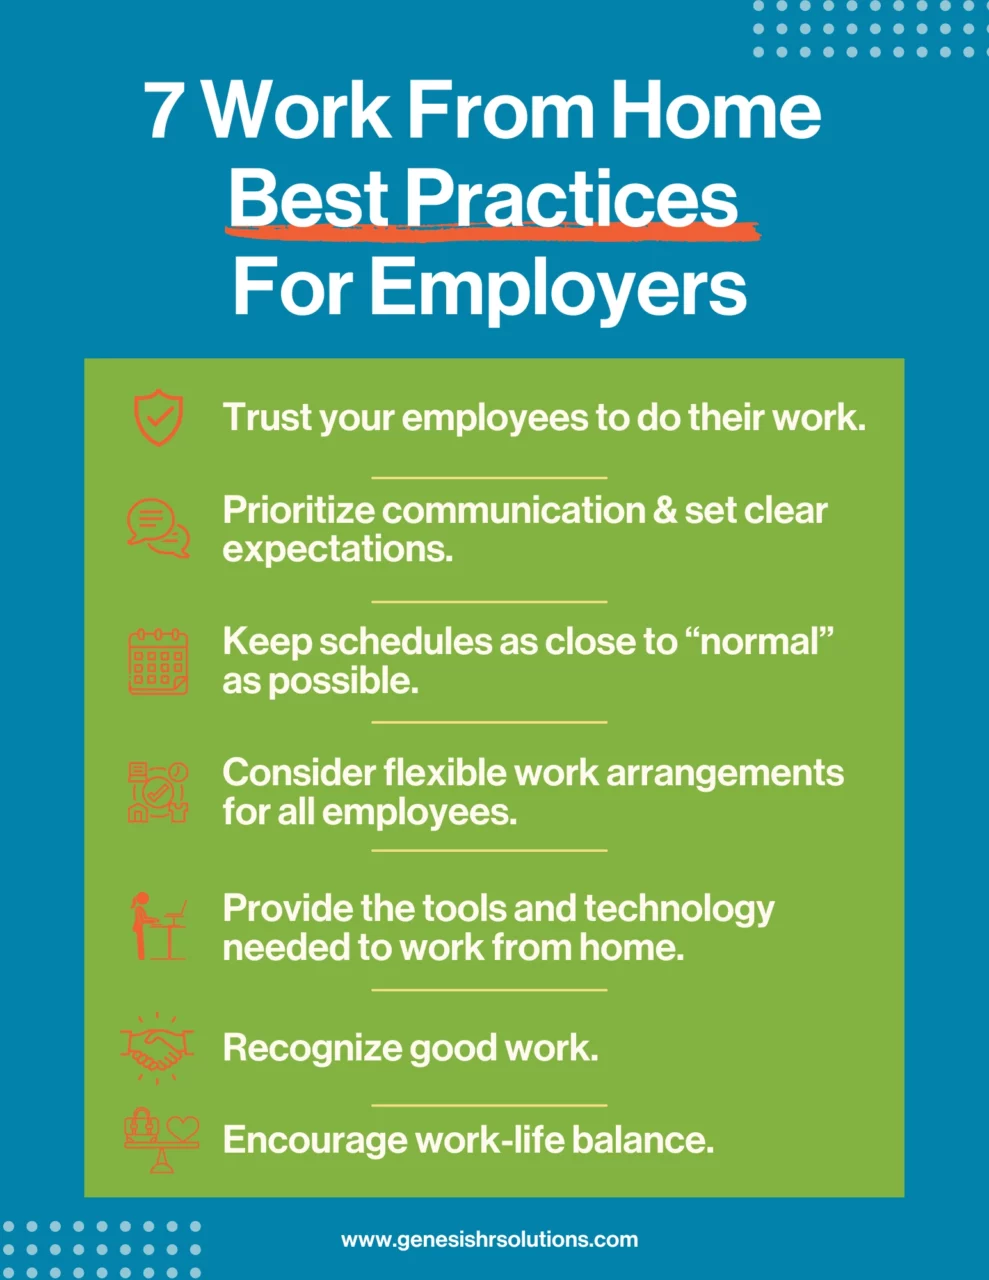 7 work from home best practices for employers